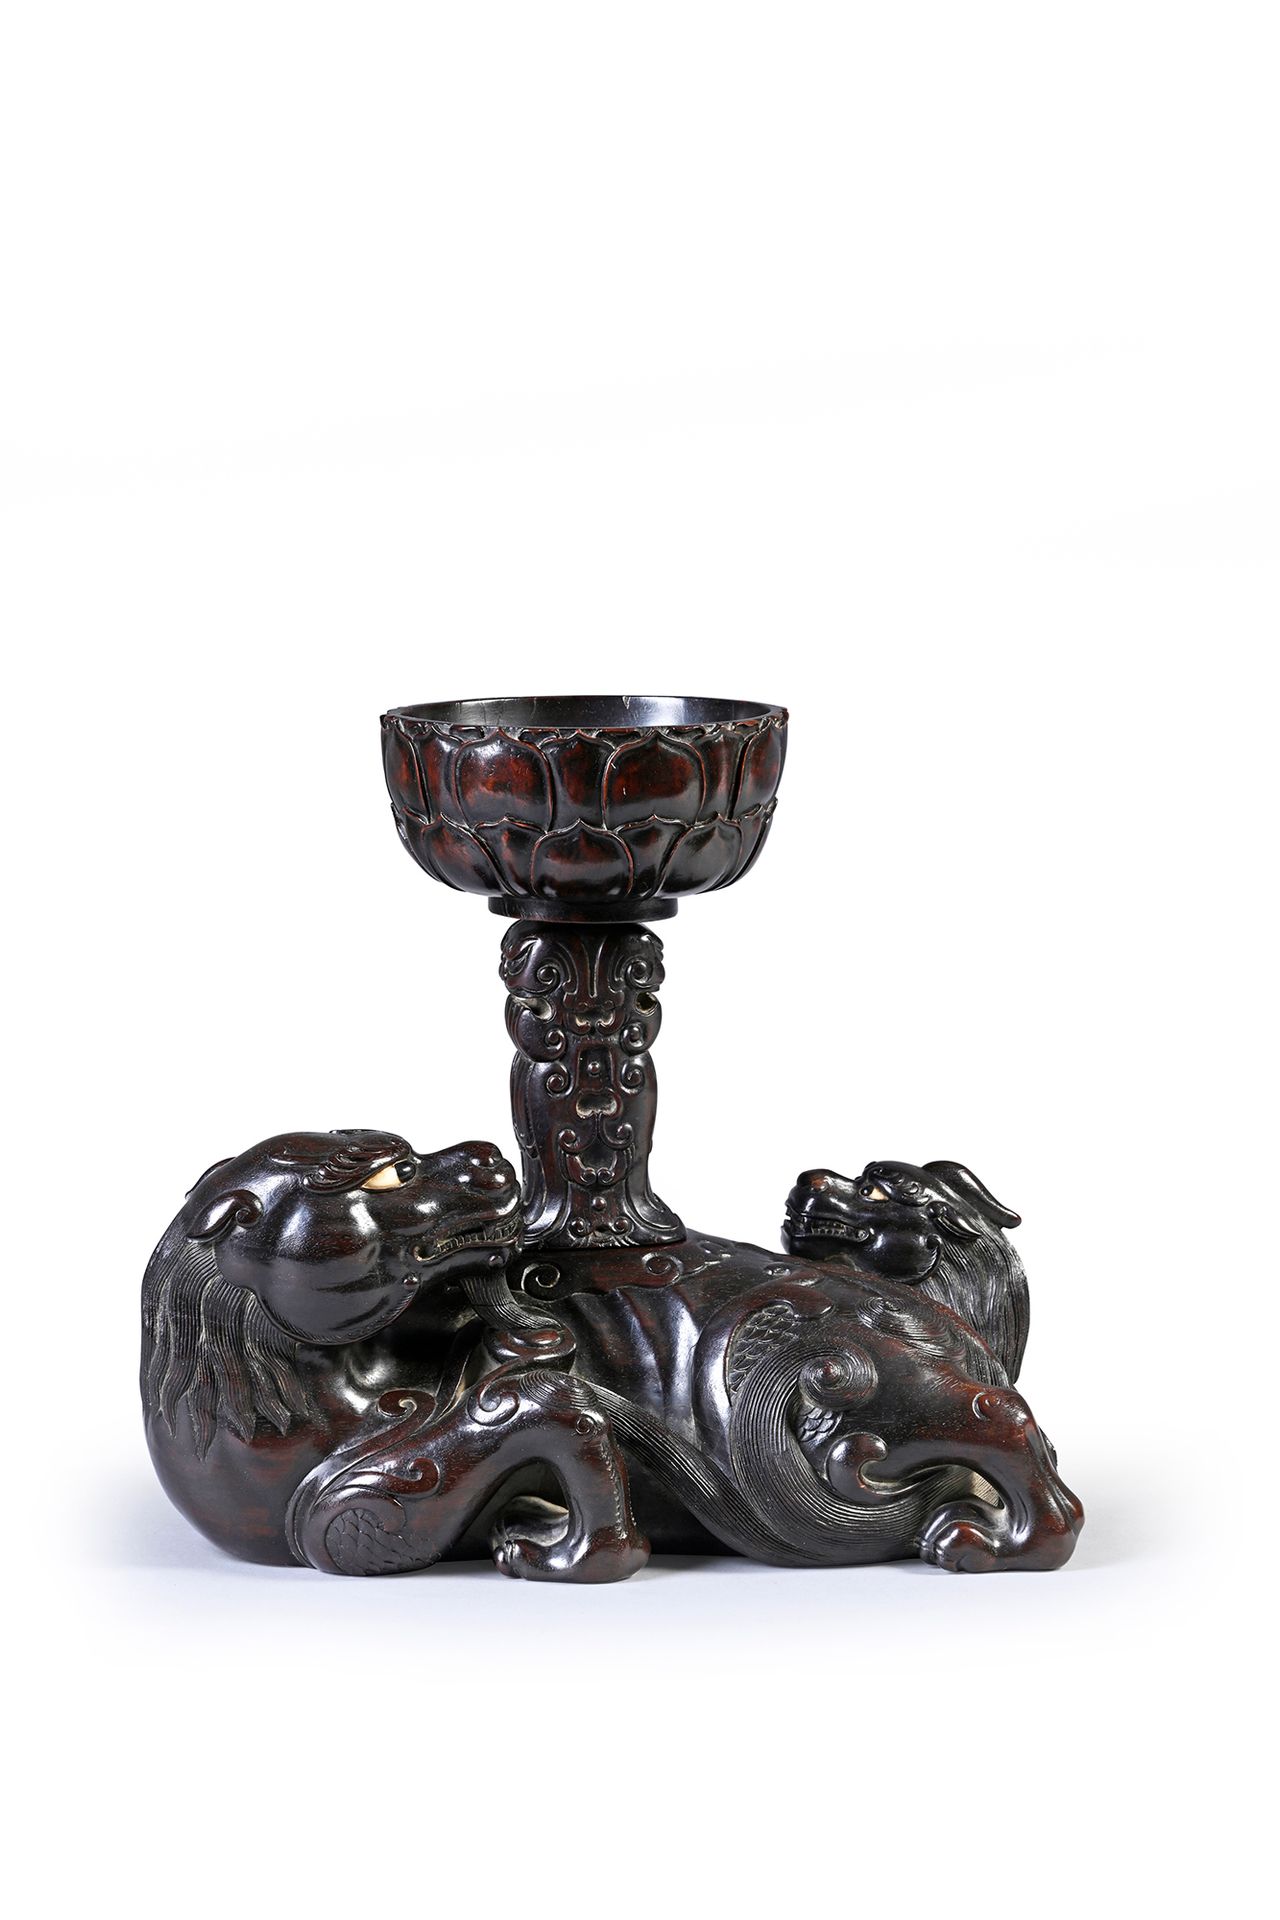 CHINE, Milieu de la dynastie Qing Interesting carved wooden candle holder
Taking&hellip;